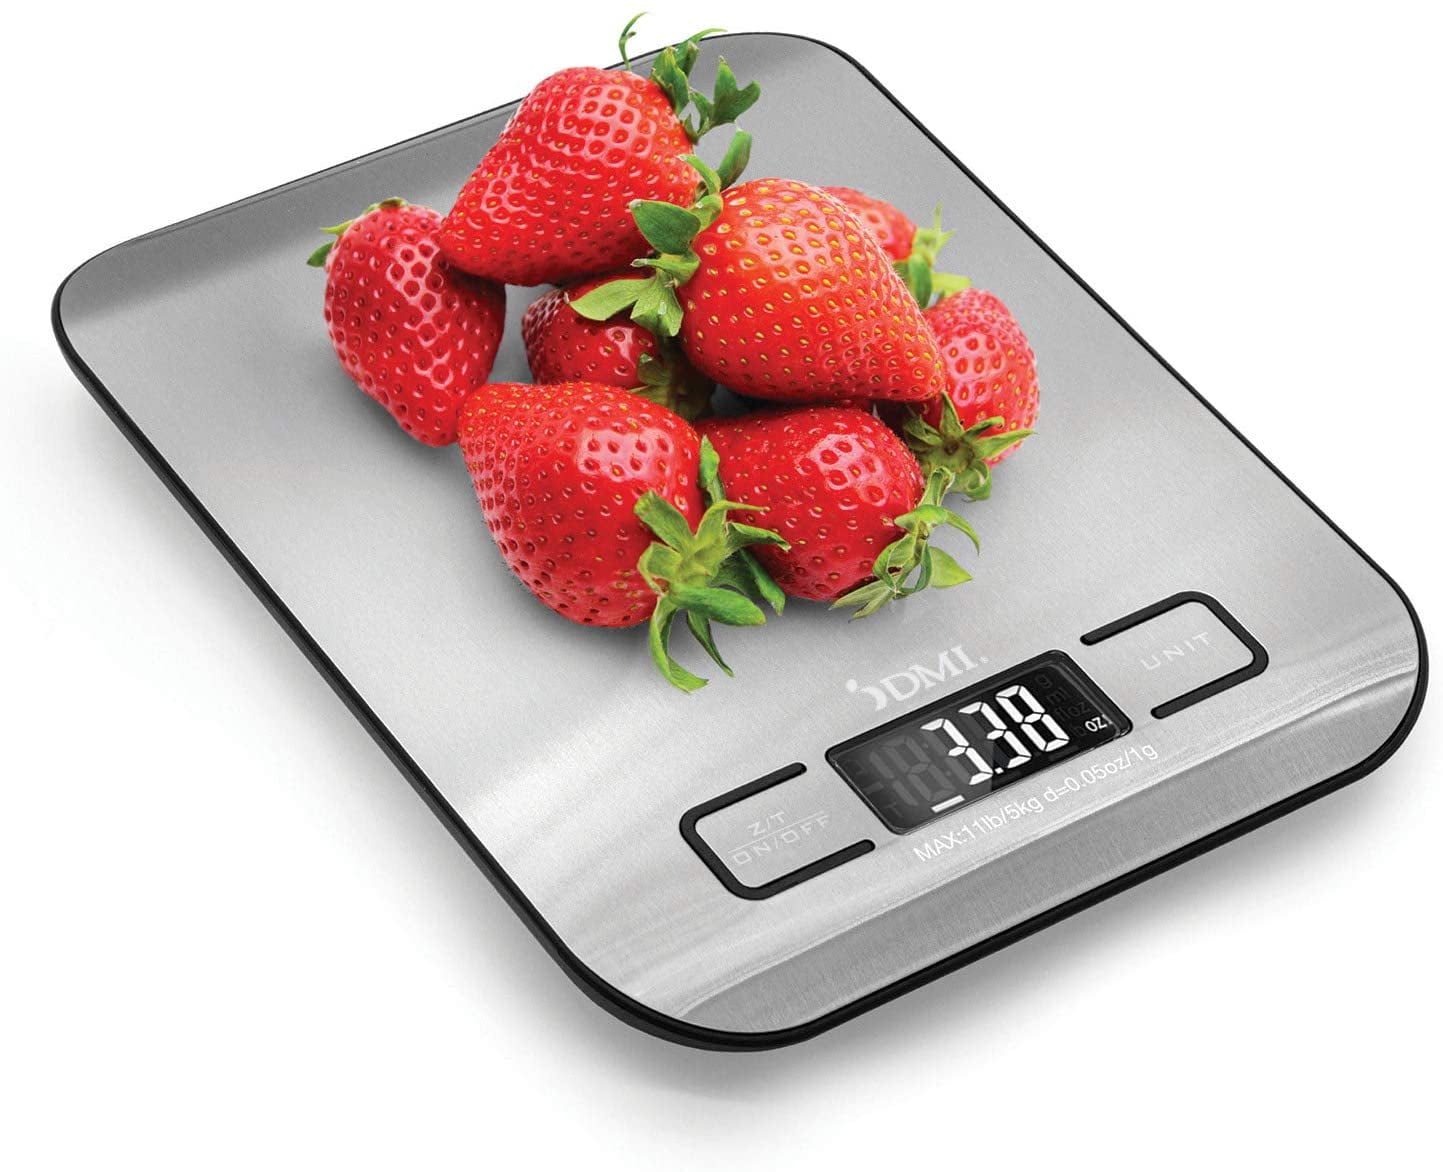 JOYHILL Digital Food Scale, 22lb Kitchen Scale with 1g/0.05oz Precise  Graduation for Weight Loss, Baking and Cooking, Stainless Steel with LED